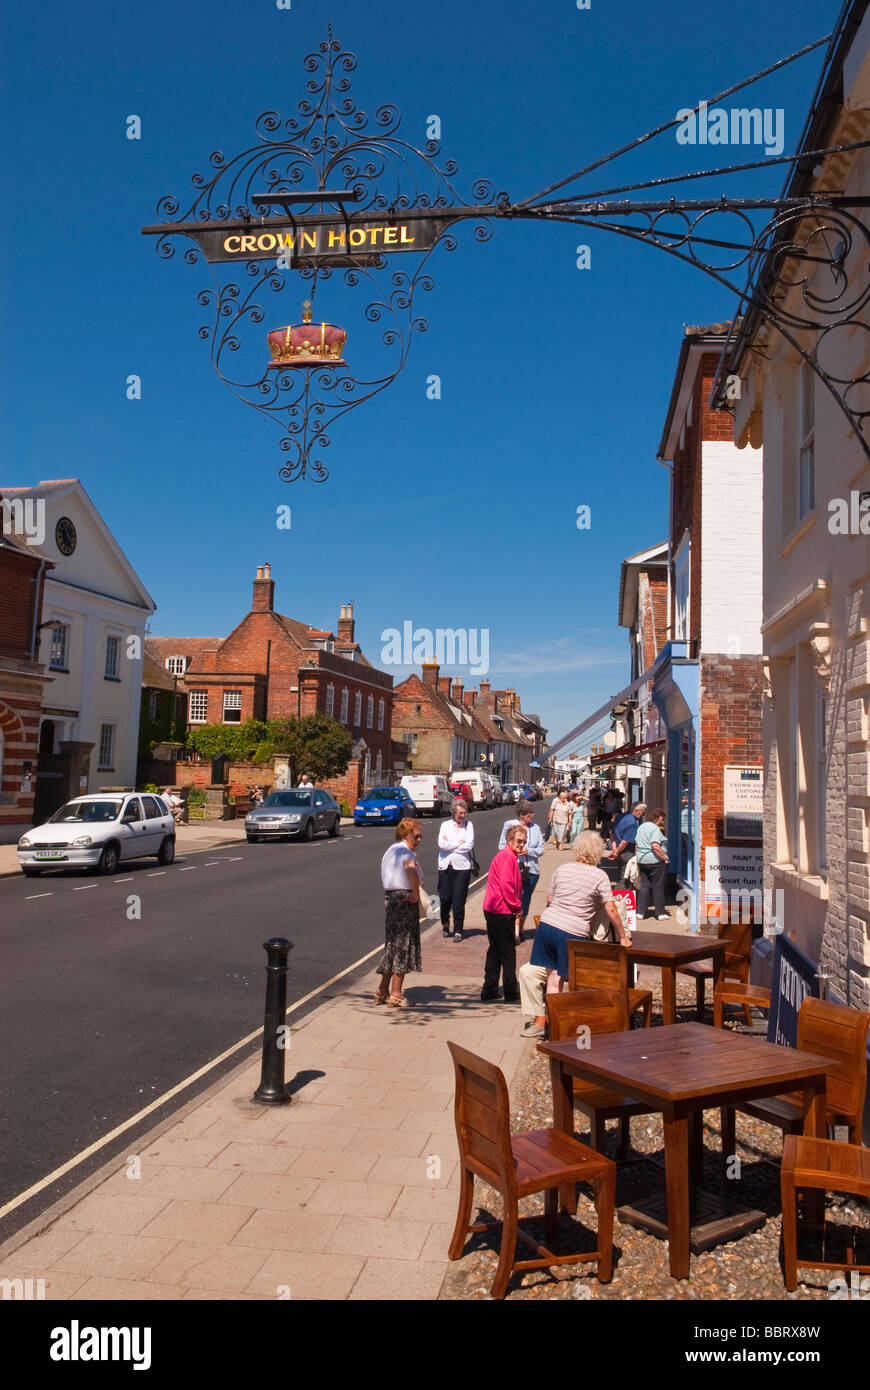 A view looking up Southwold high street with people shopping and the crown hotel in the foreground in Suffolk Uk Stock Photo